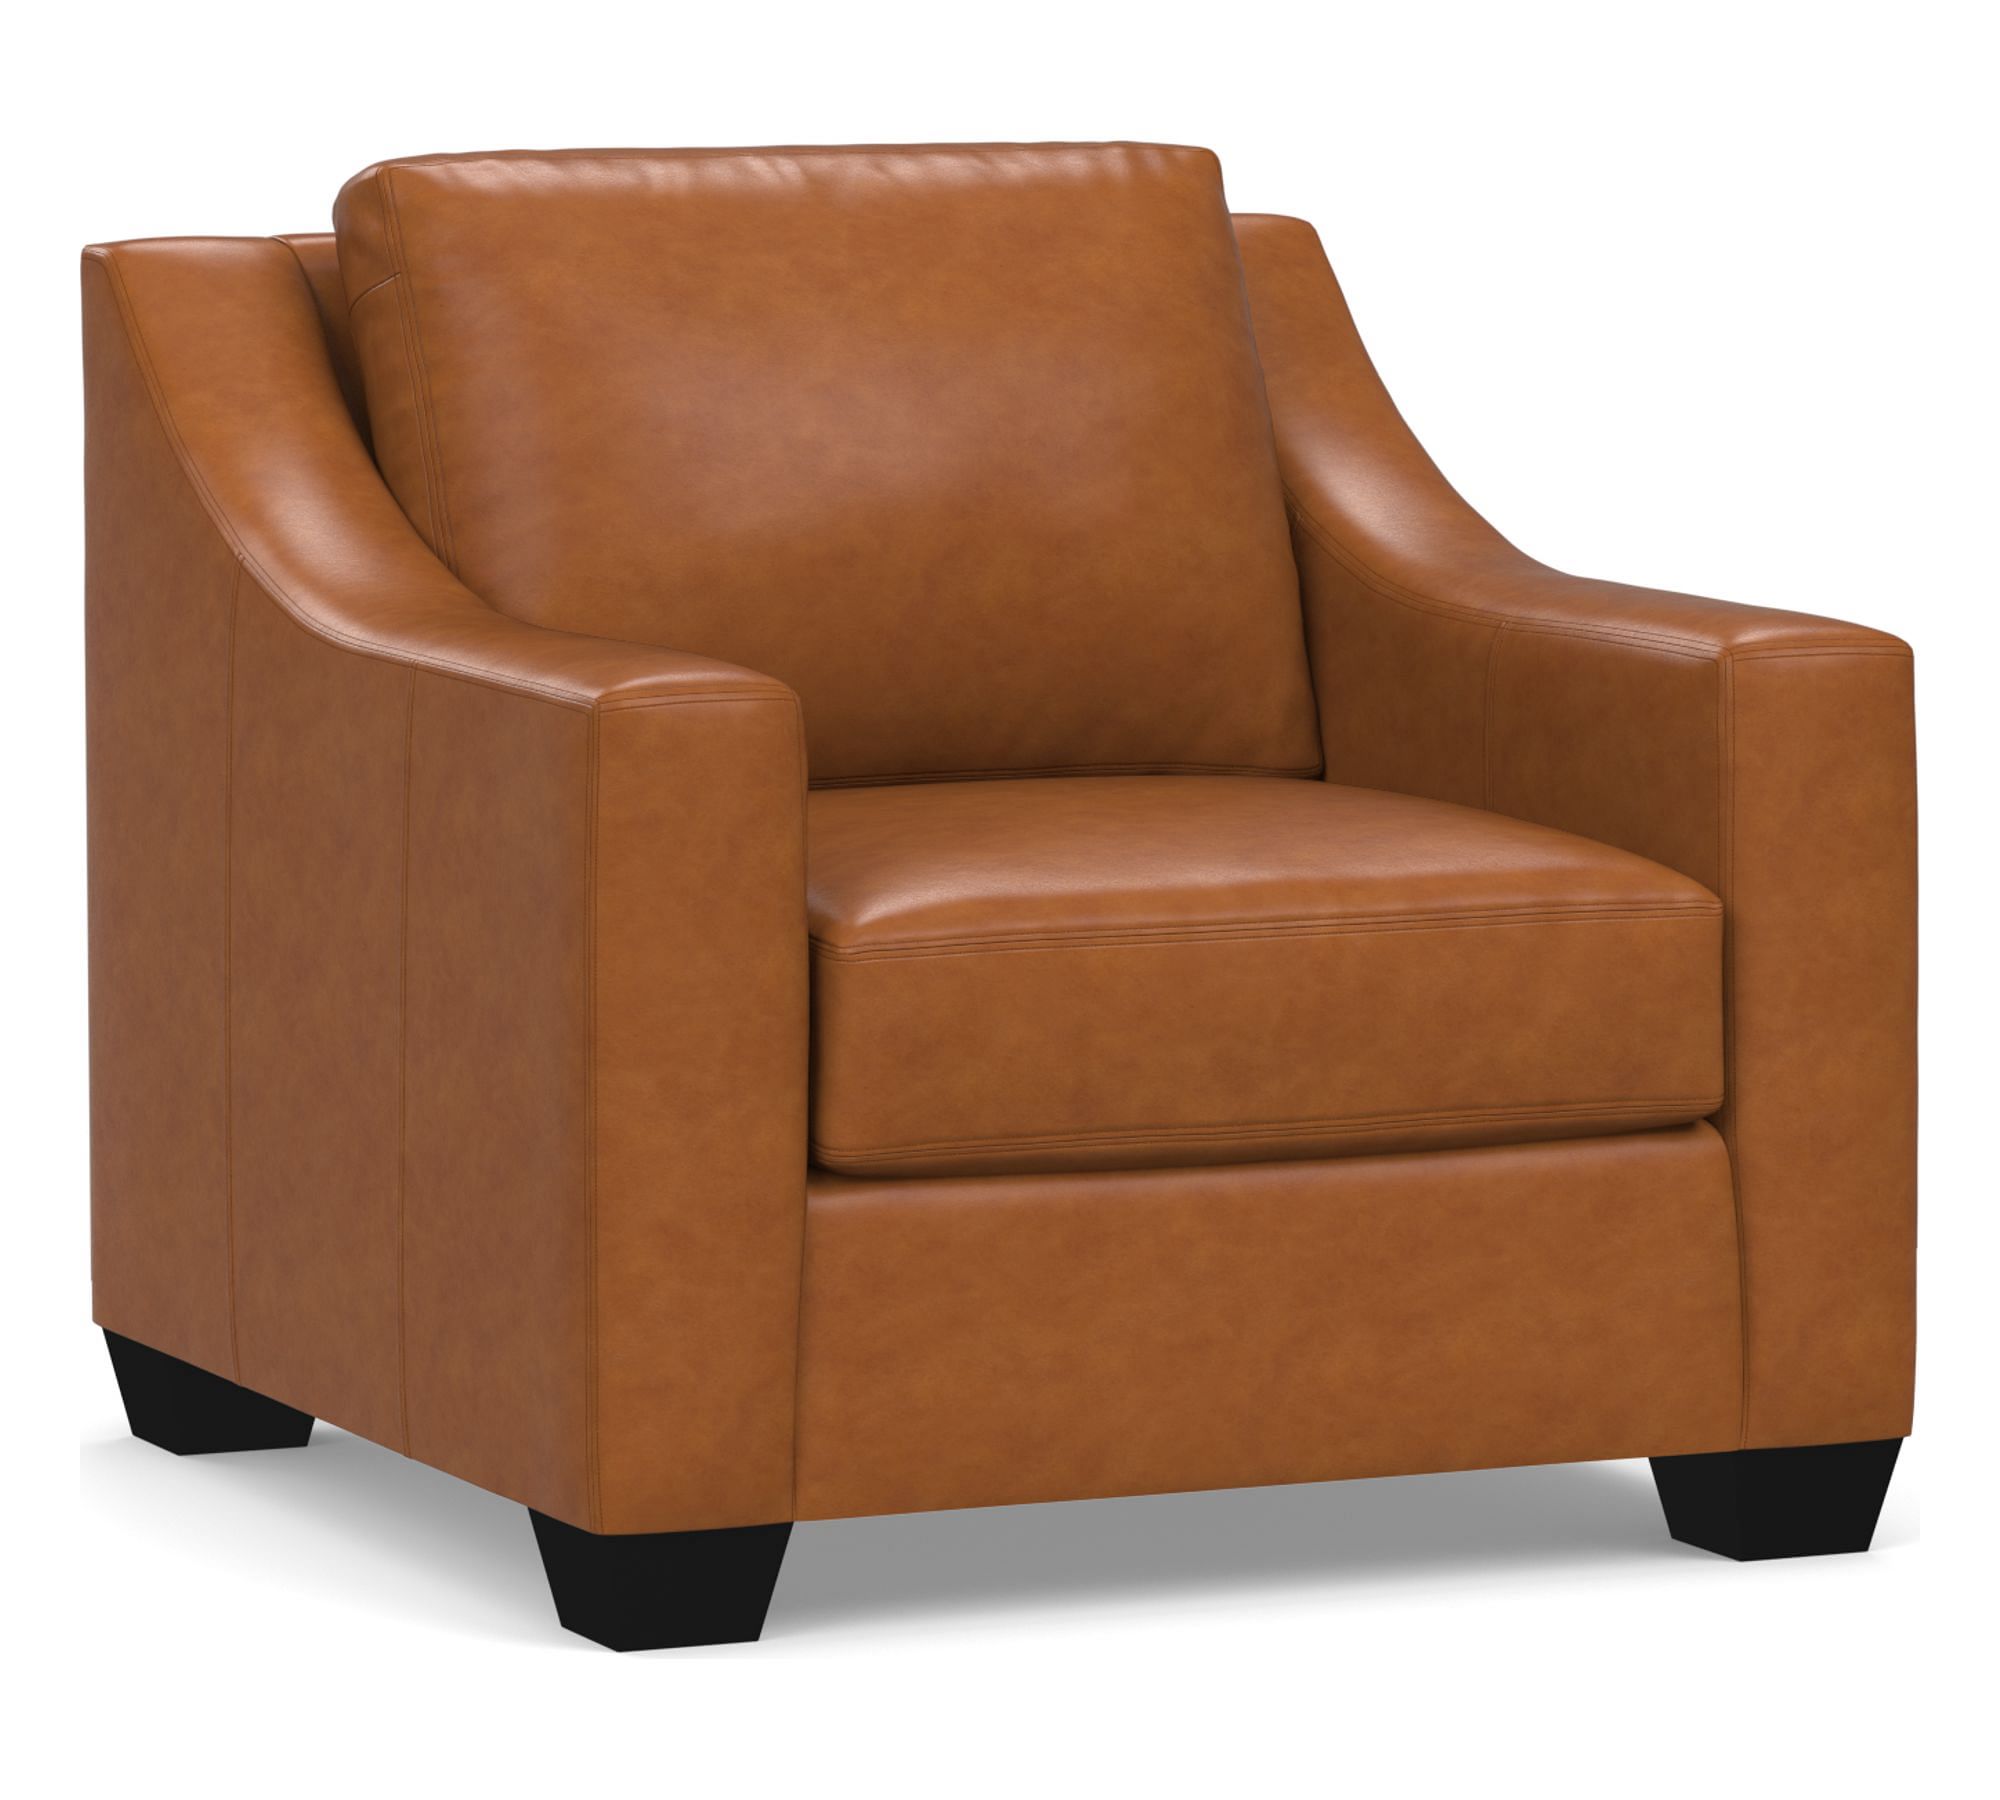 York Slope Arm Leather Chair